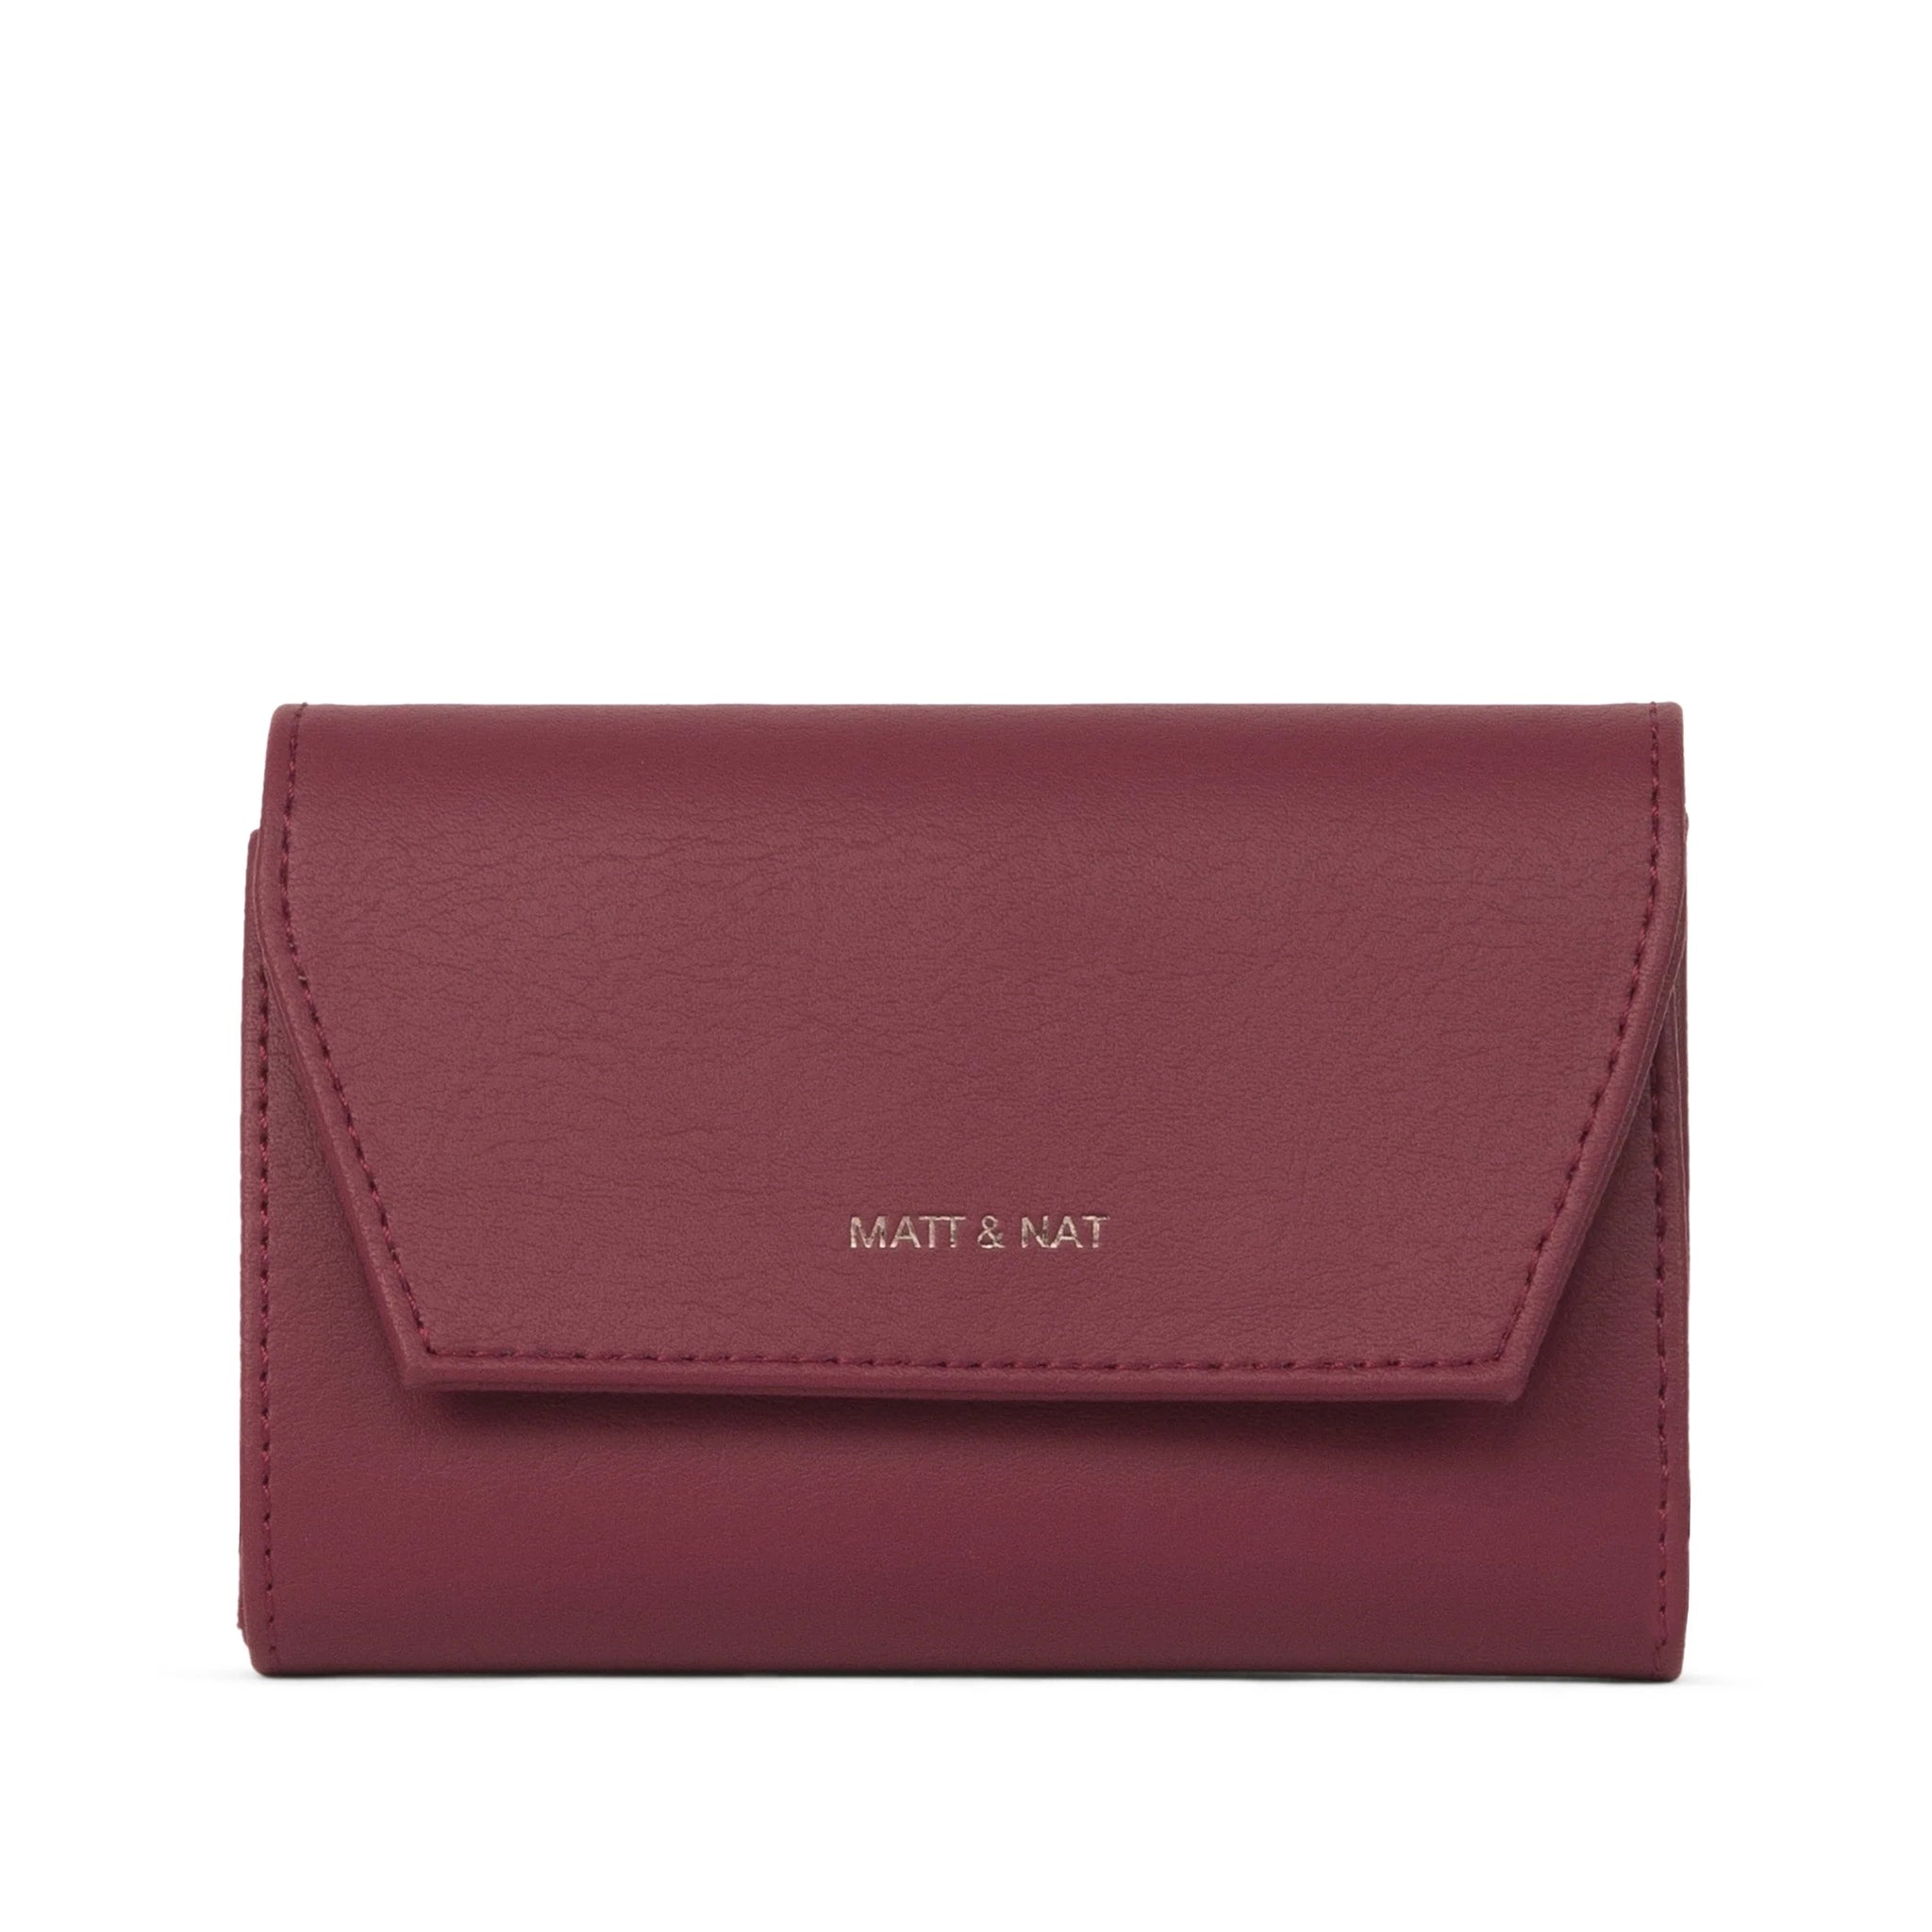 On a white background is a dark cherry red wallet. 